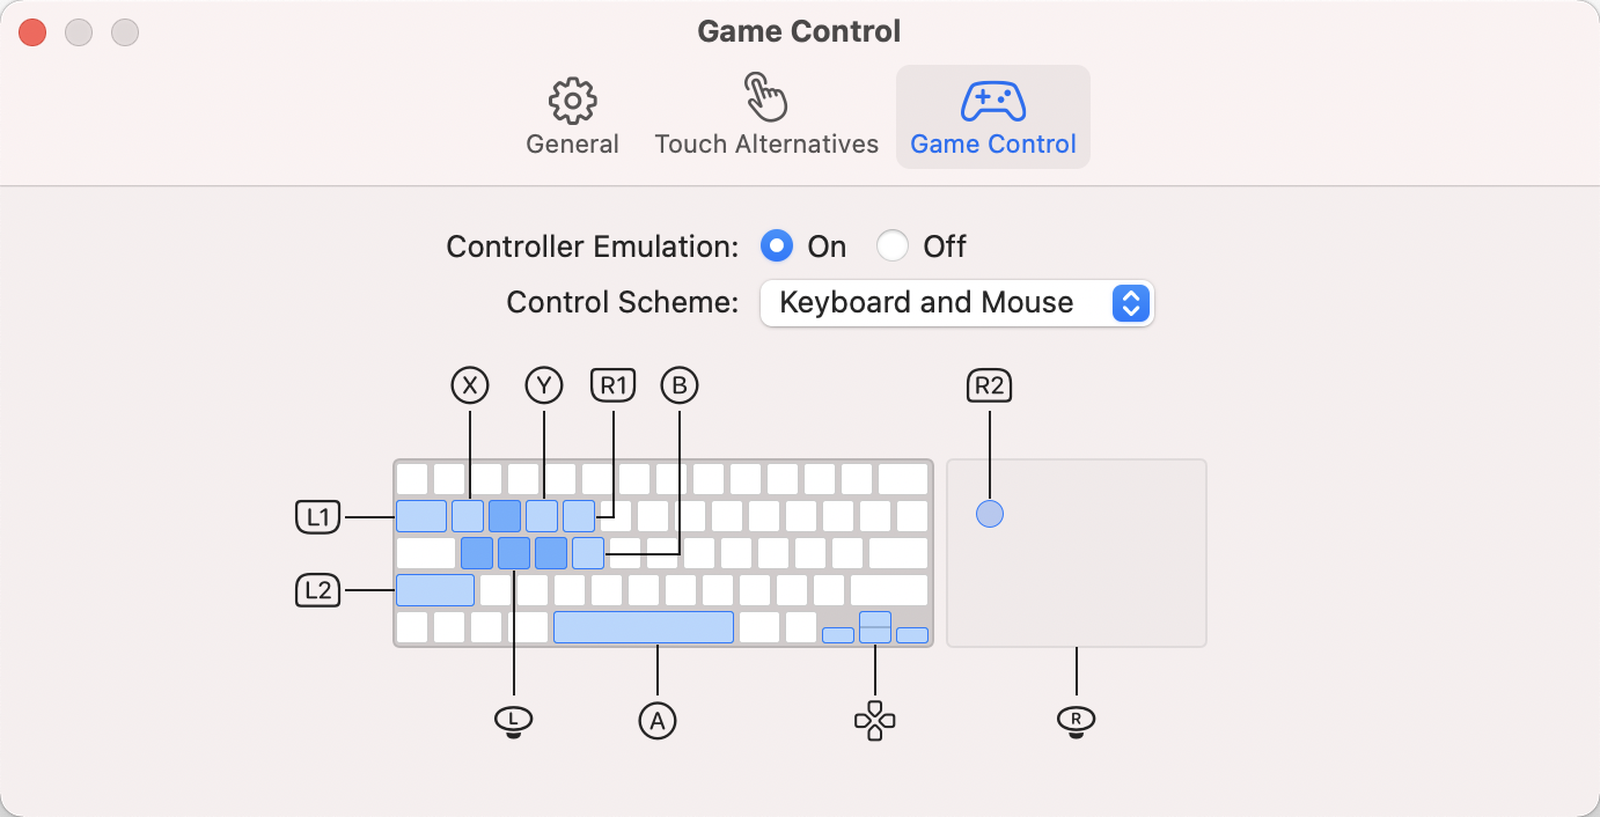 macOS Big Sur 11.3 includes game controller emulation for iPhone / iPad applications on M1 Macs